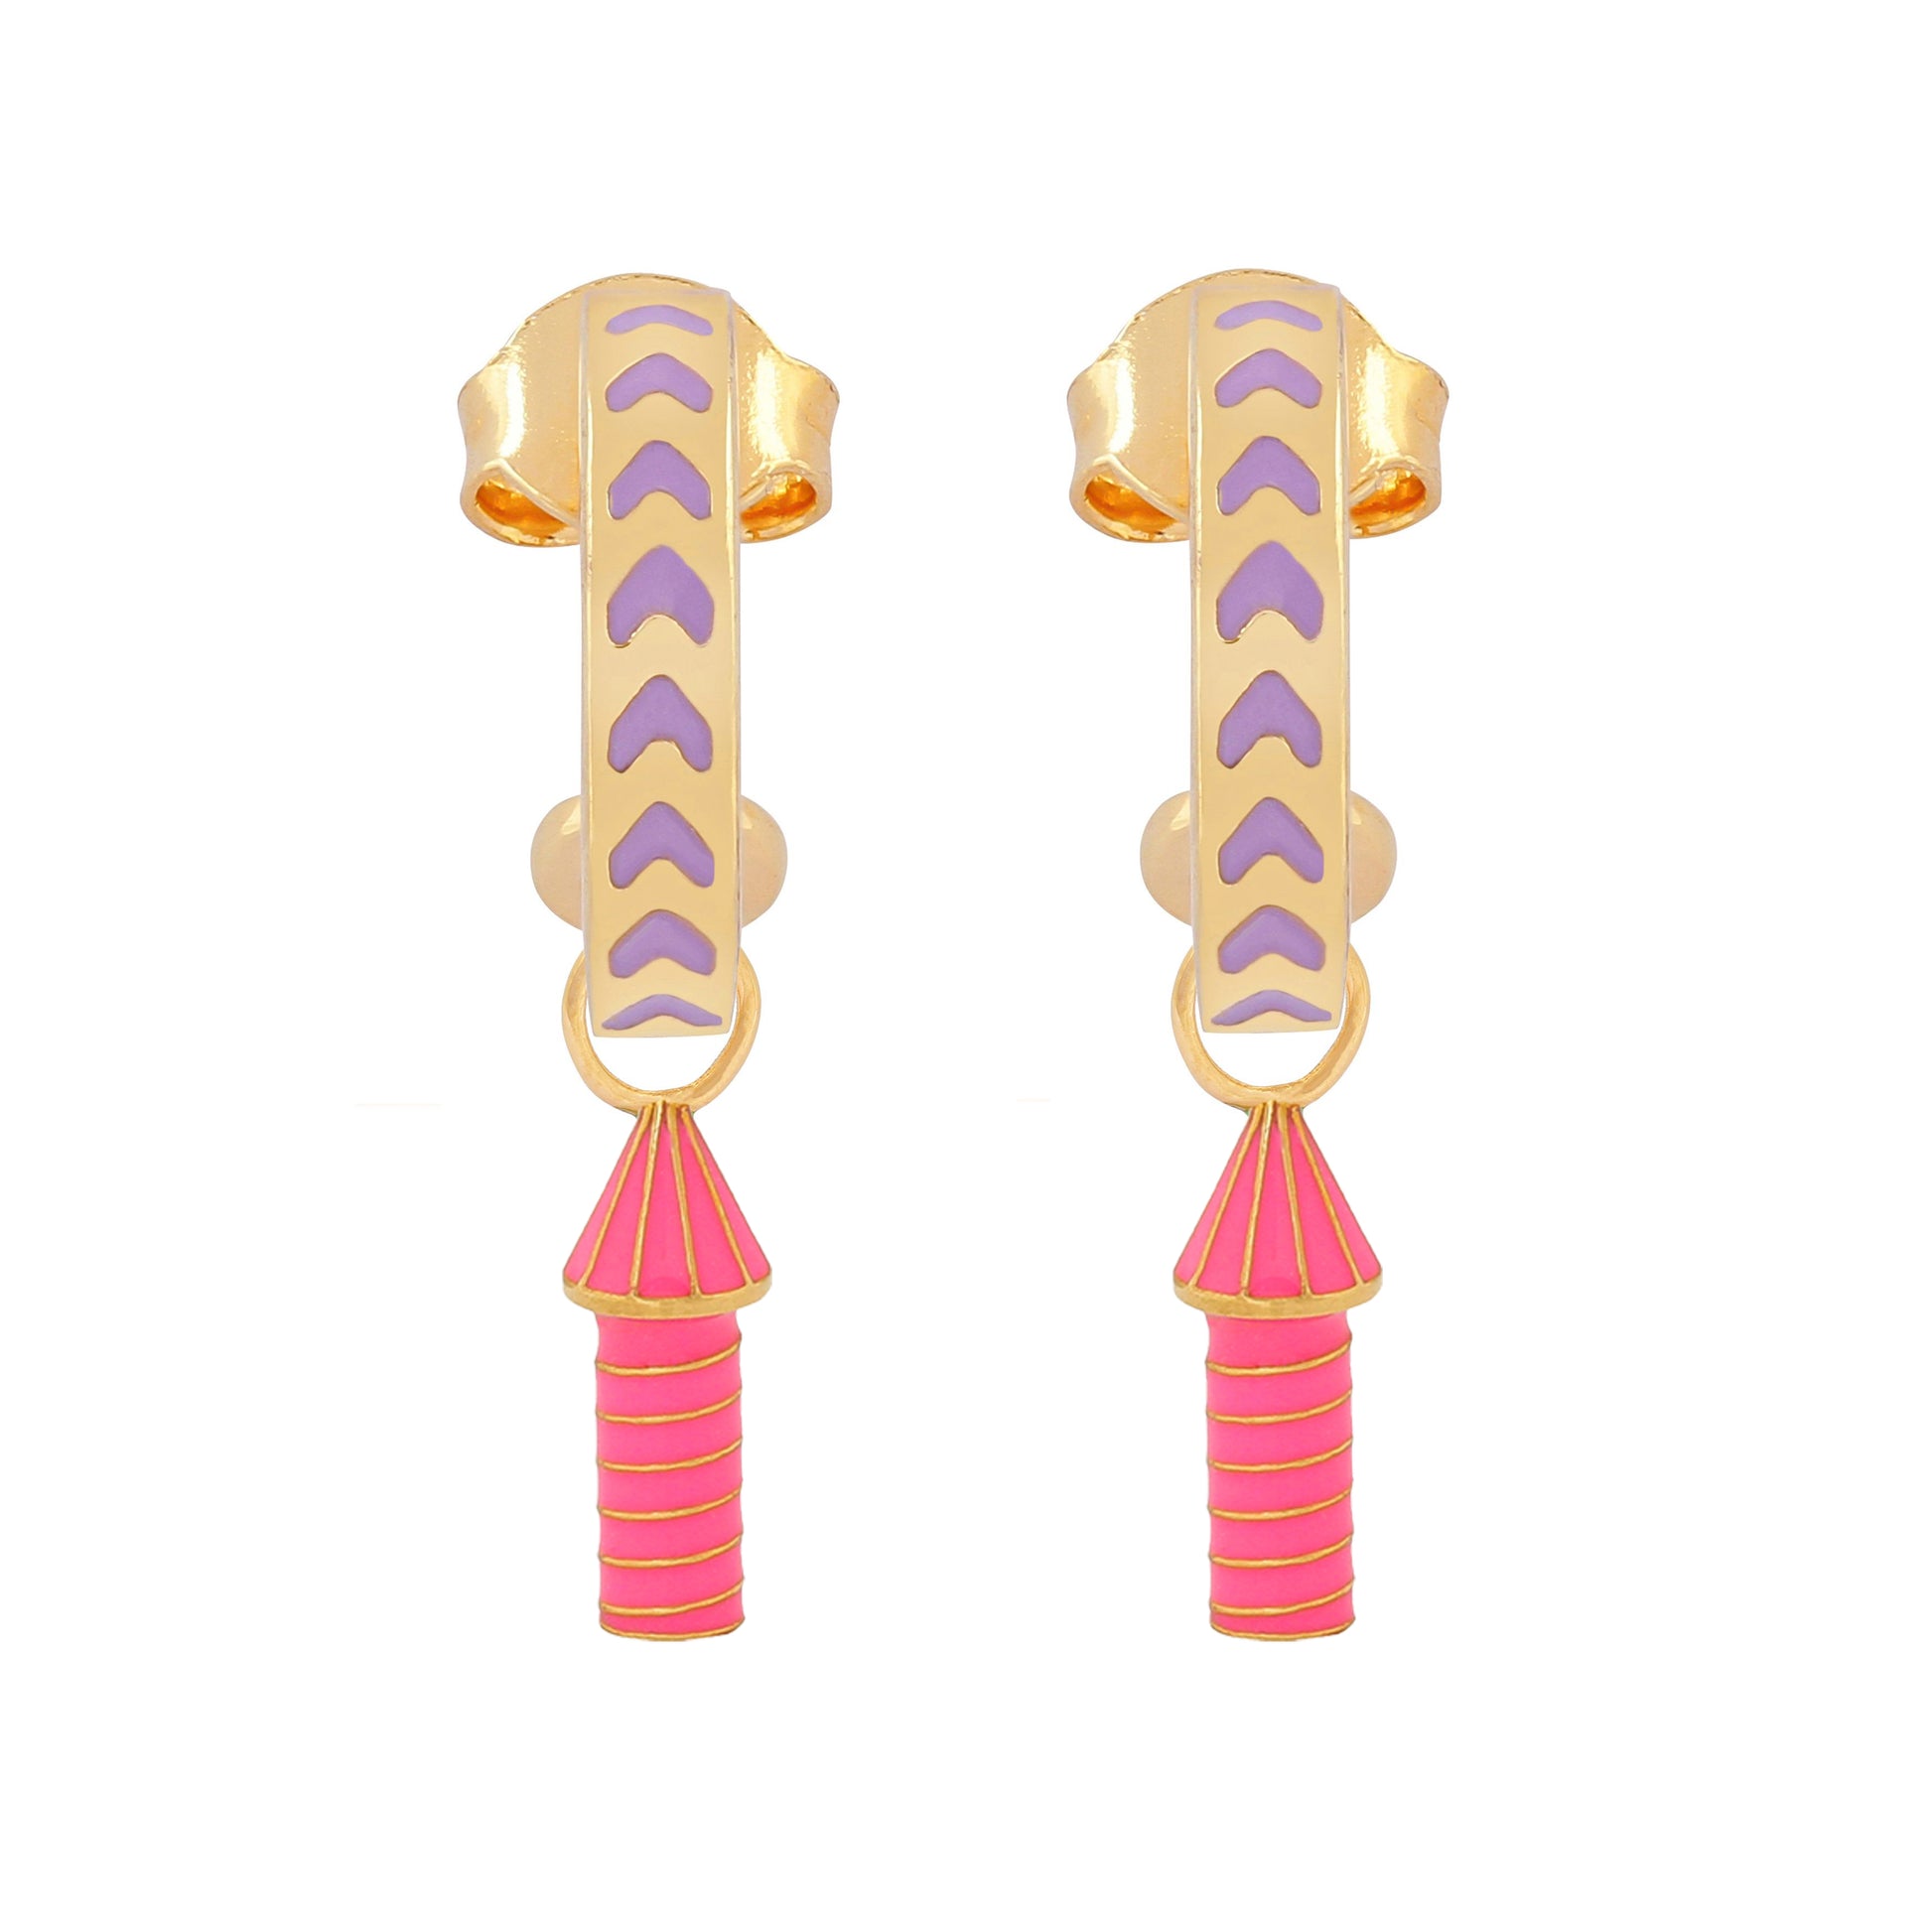 image of rocket enamel earrings in purple, pink and gold on white background